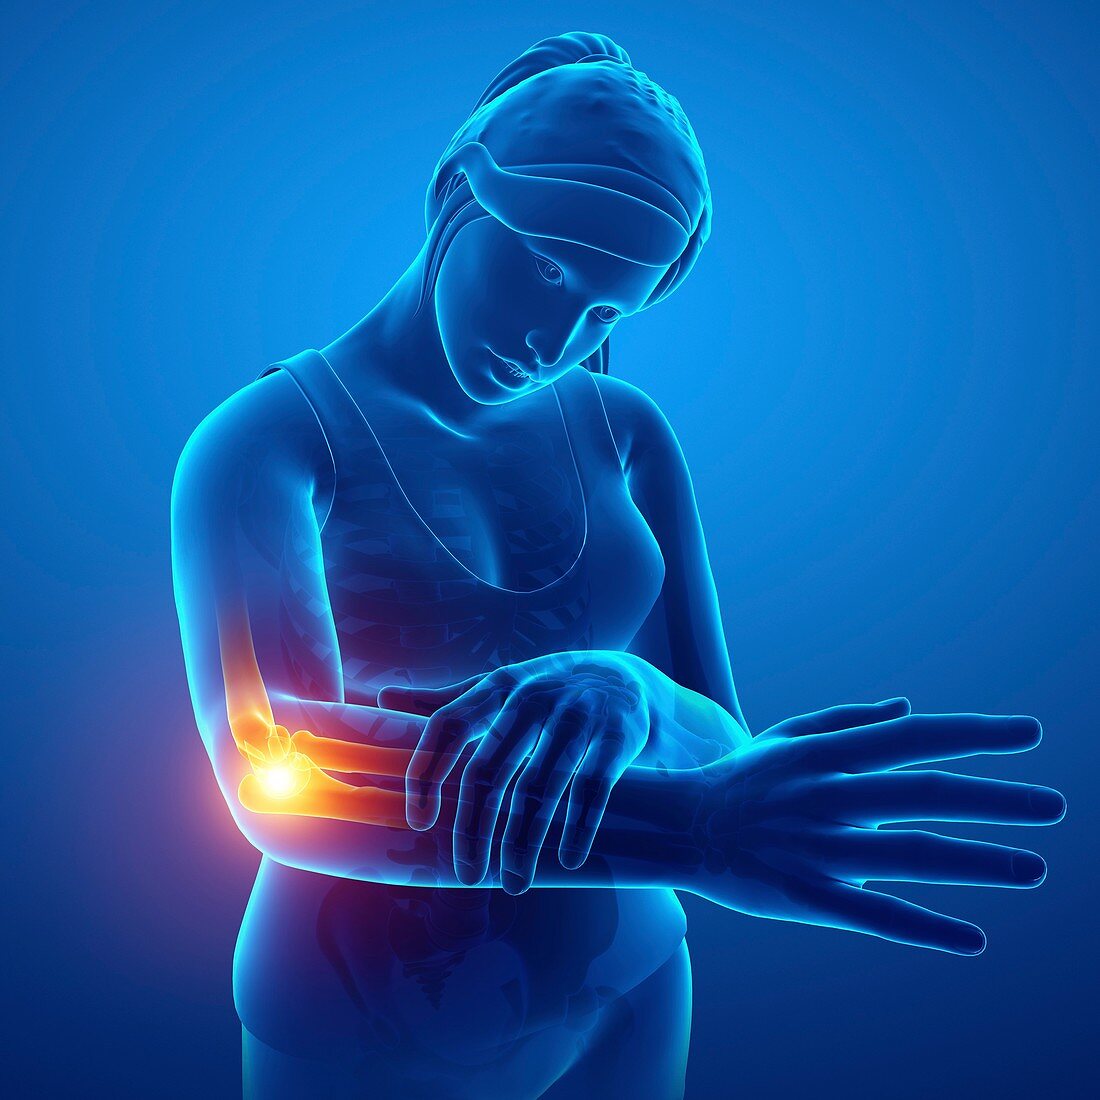 Woman with elbow pain, illustration